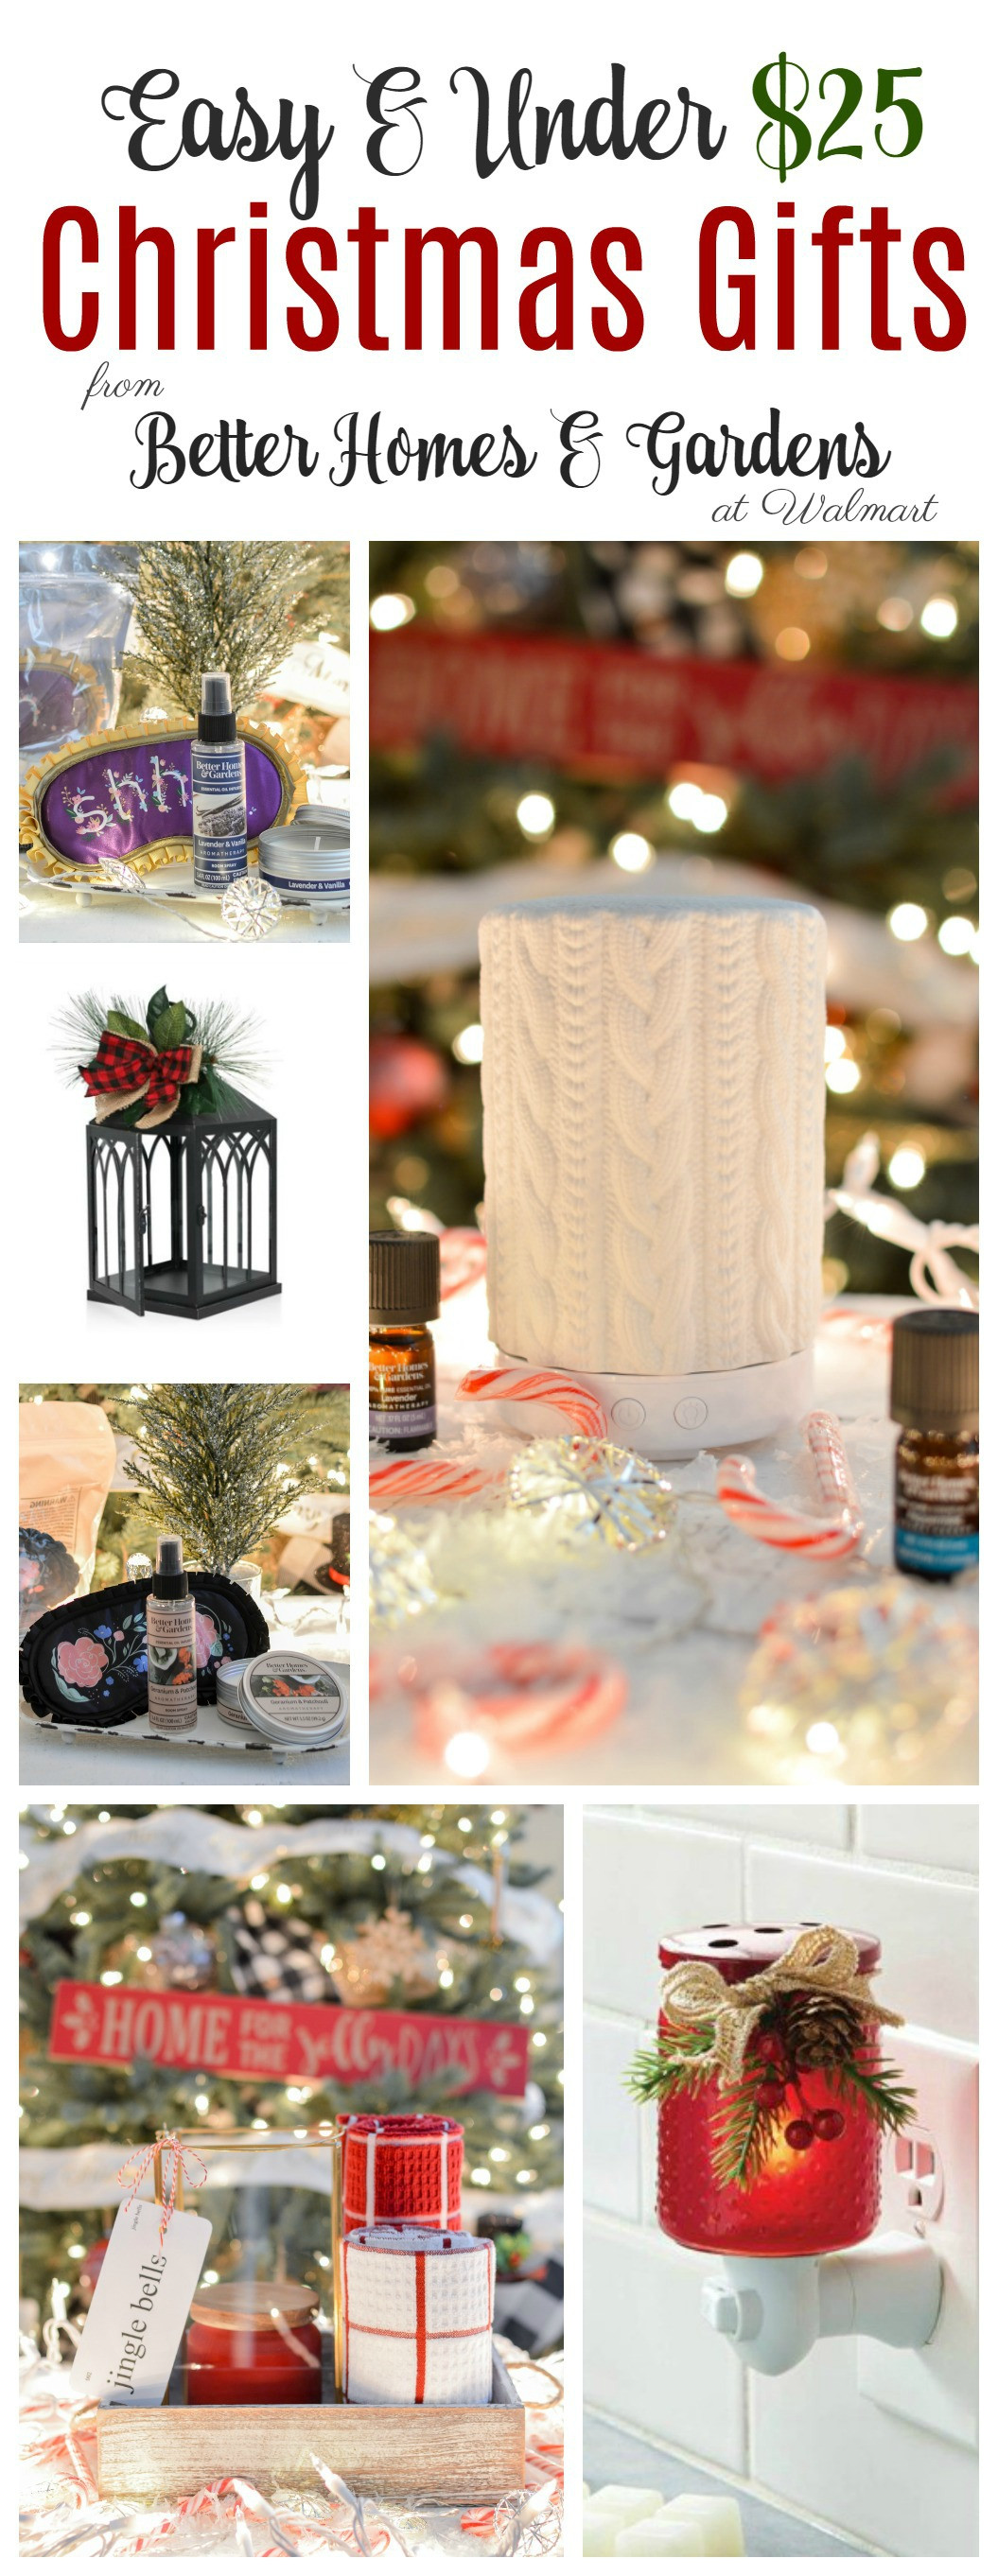 Christmas Gift Ideas Under $25
 Cute Christmas Gift Ideas Under $25 with Better Homes